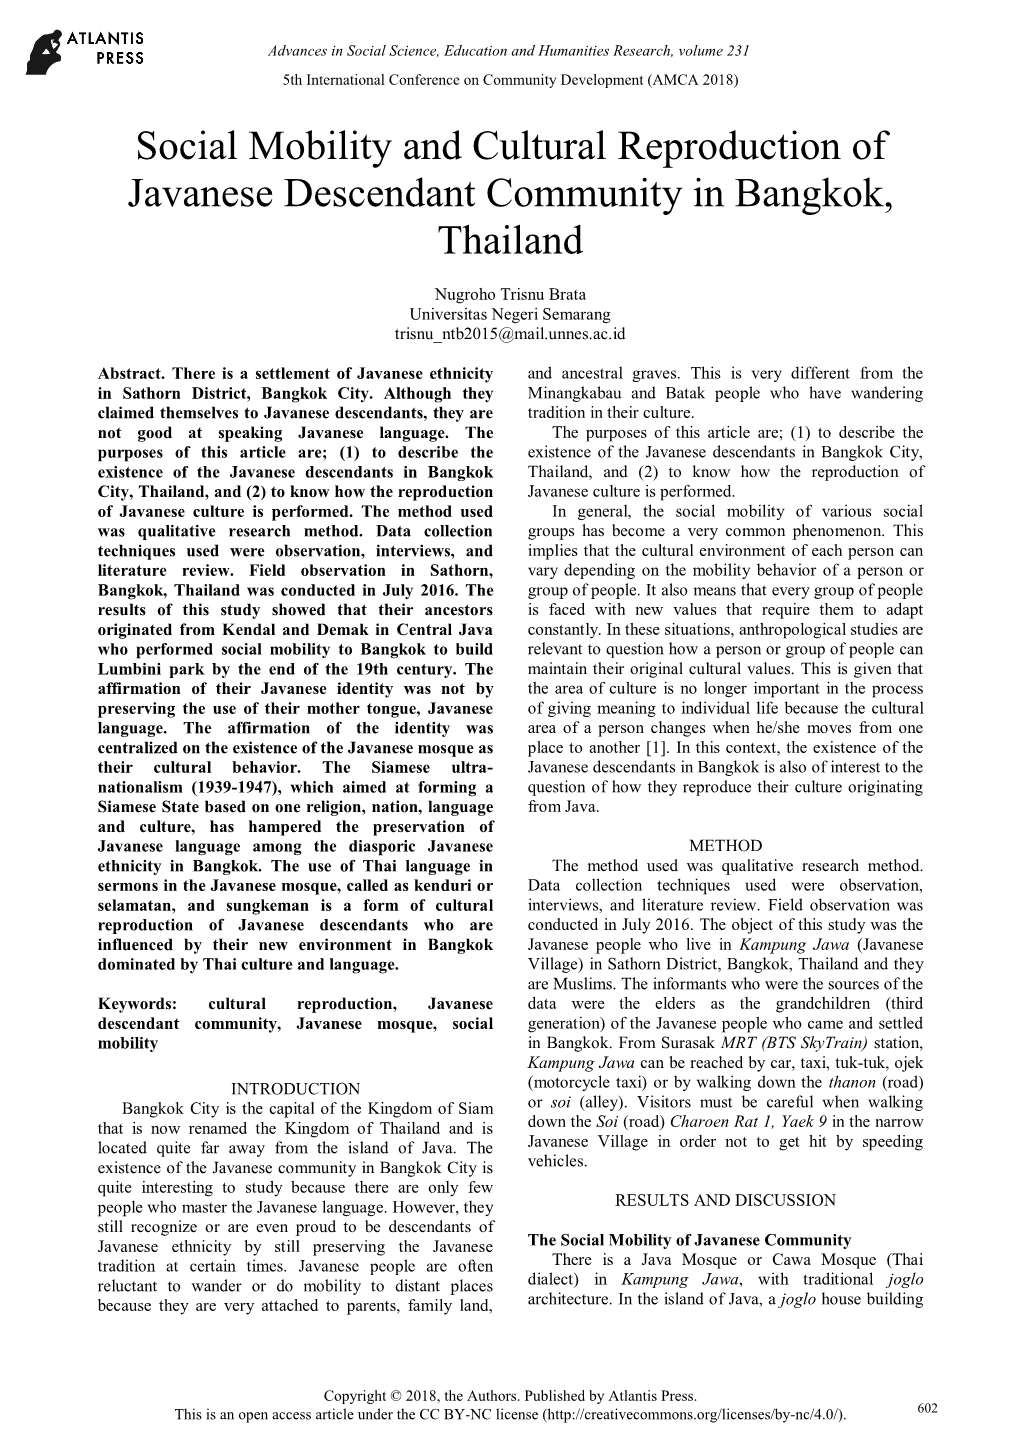 Social Mobility and Cultural Reproduction of Javanese Descendant Community in Bangkok, Thailand